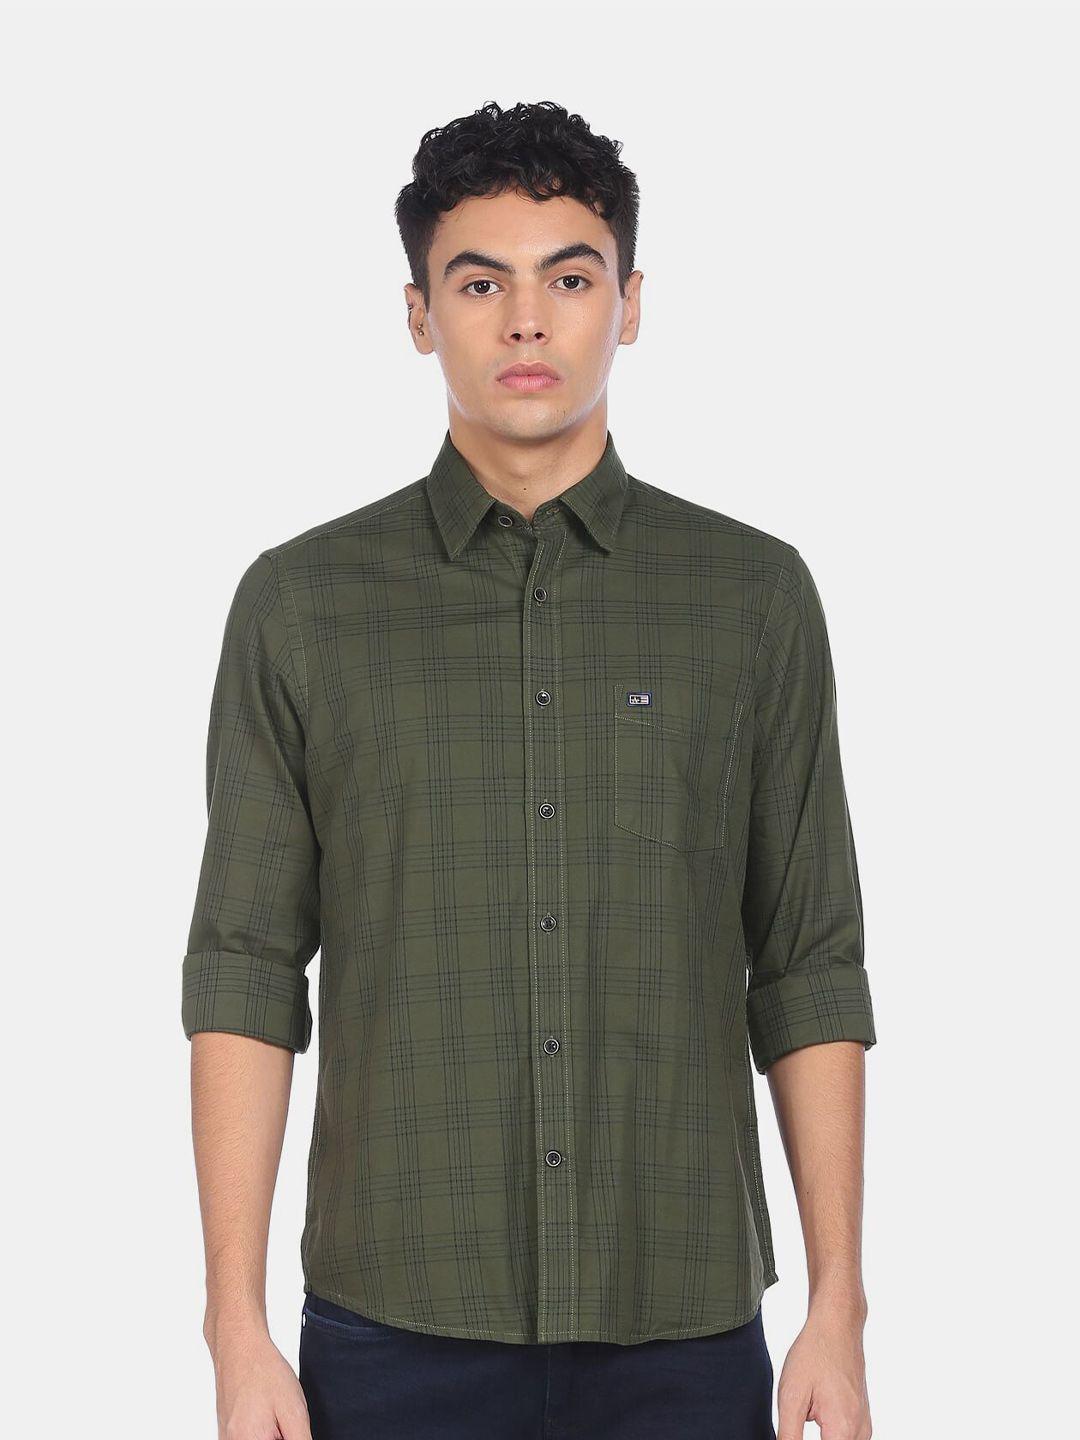 arrow sport men olive green & black checked pure cotton casual shirt